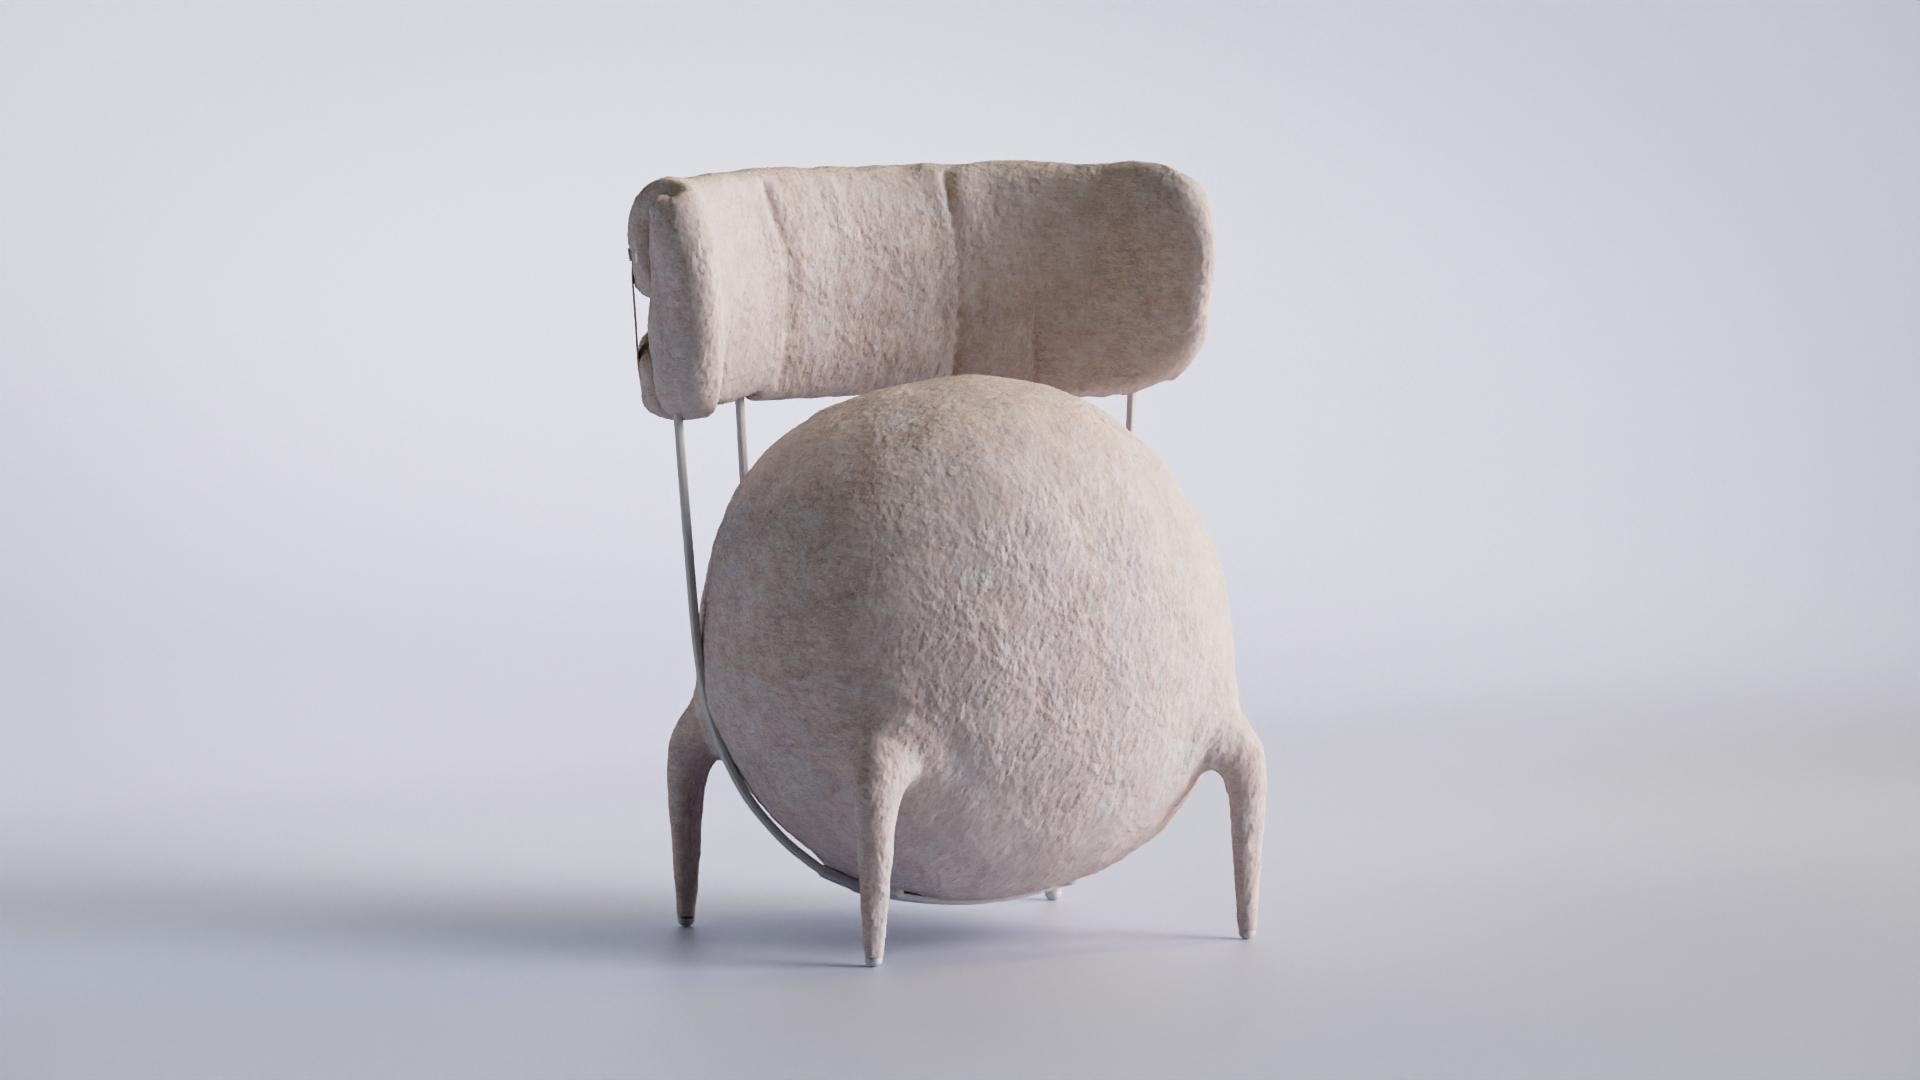 Lympho Contemporary Lounge Chair by Taras Zheltyshev
Dimensions: 90 x 60 x 60 cm
Materials: Felt, wood, metal


This unique project is part of the “microworld” collection and
represents an image of a biological cell designed for obvious
interior